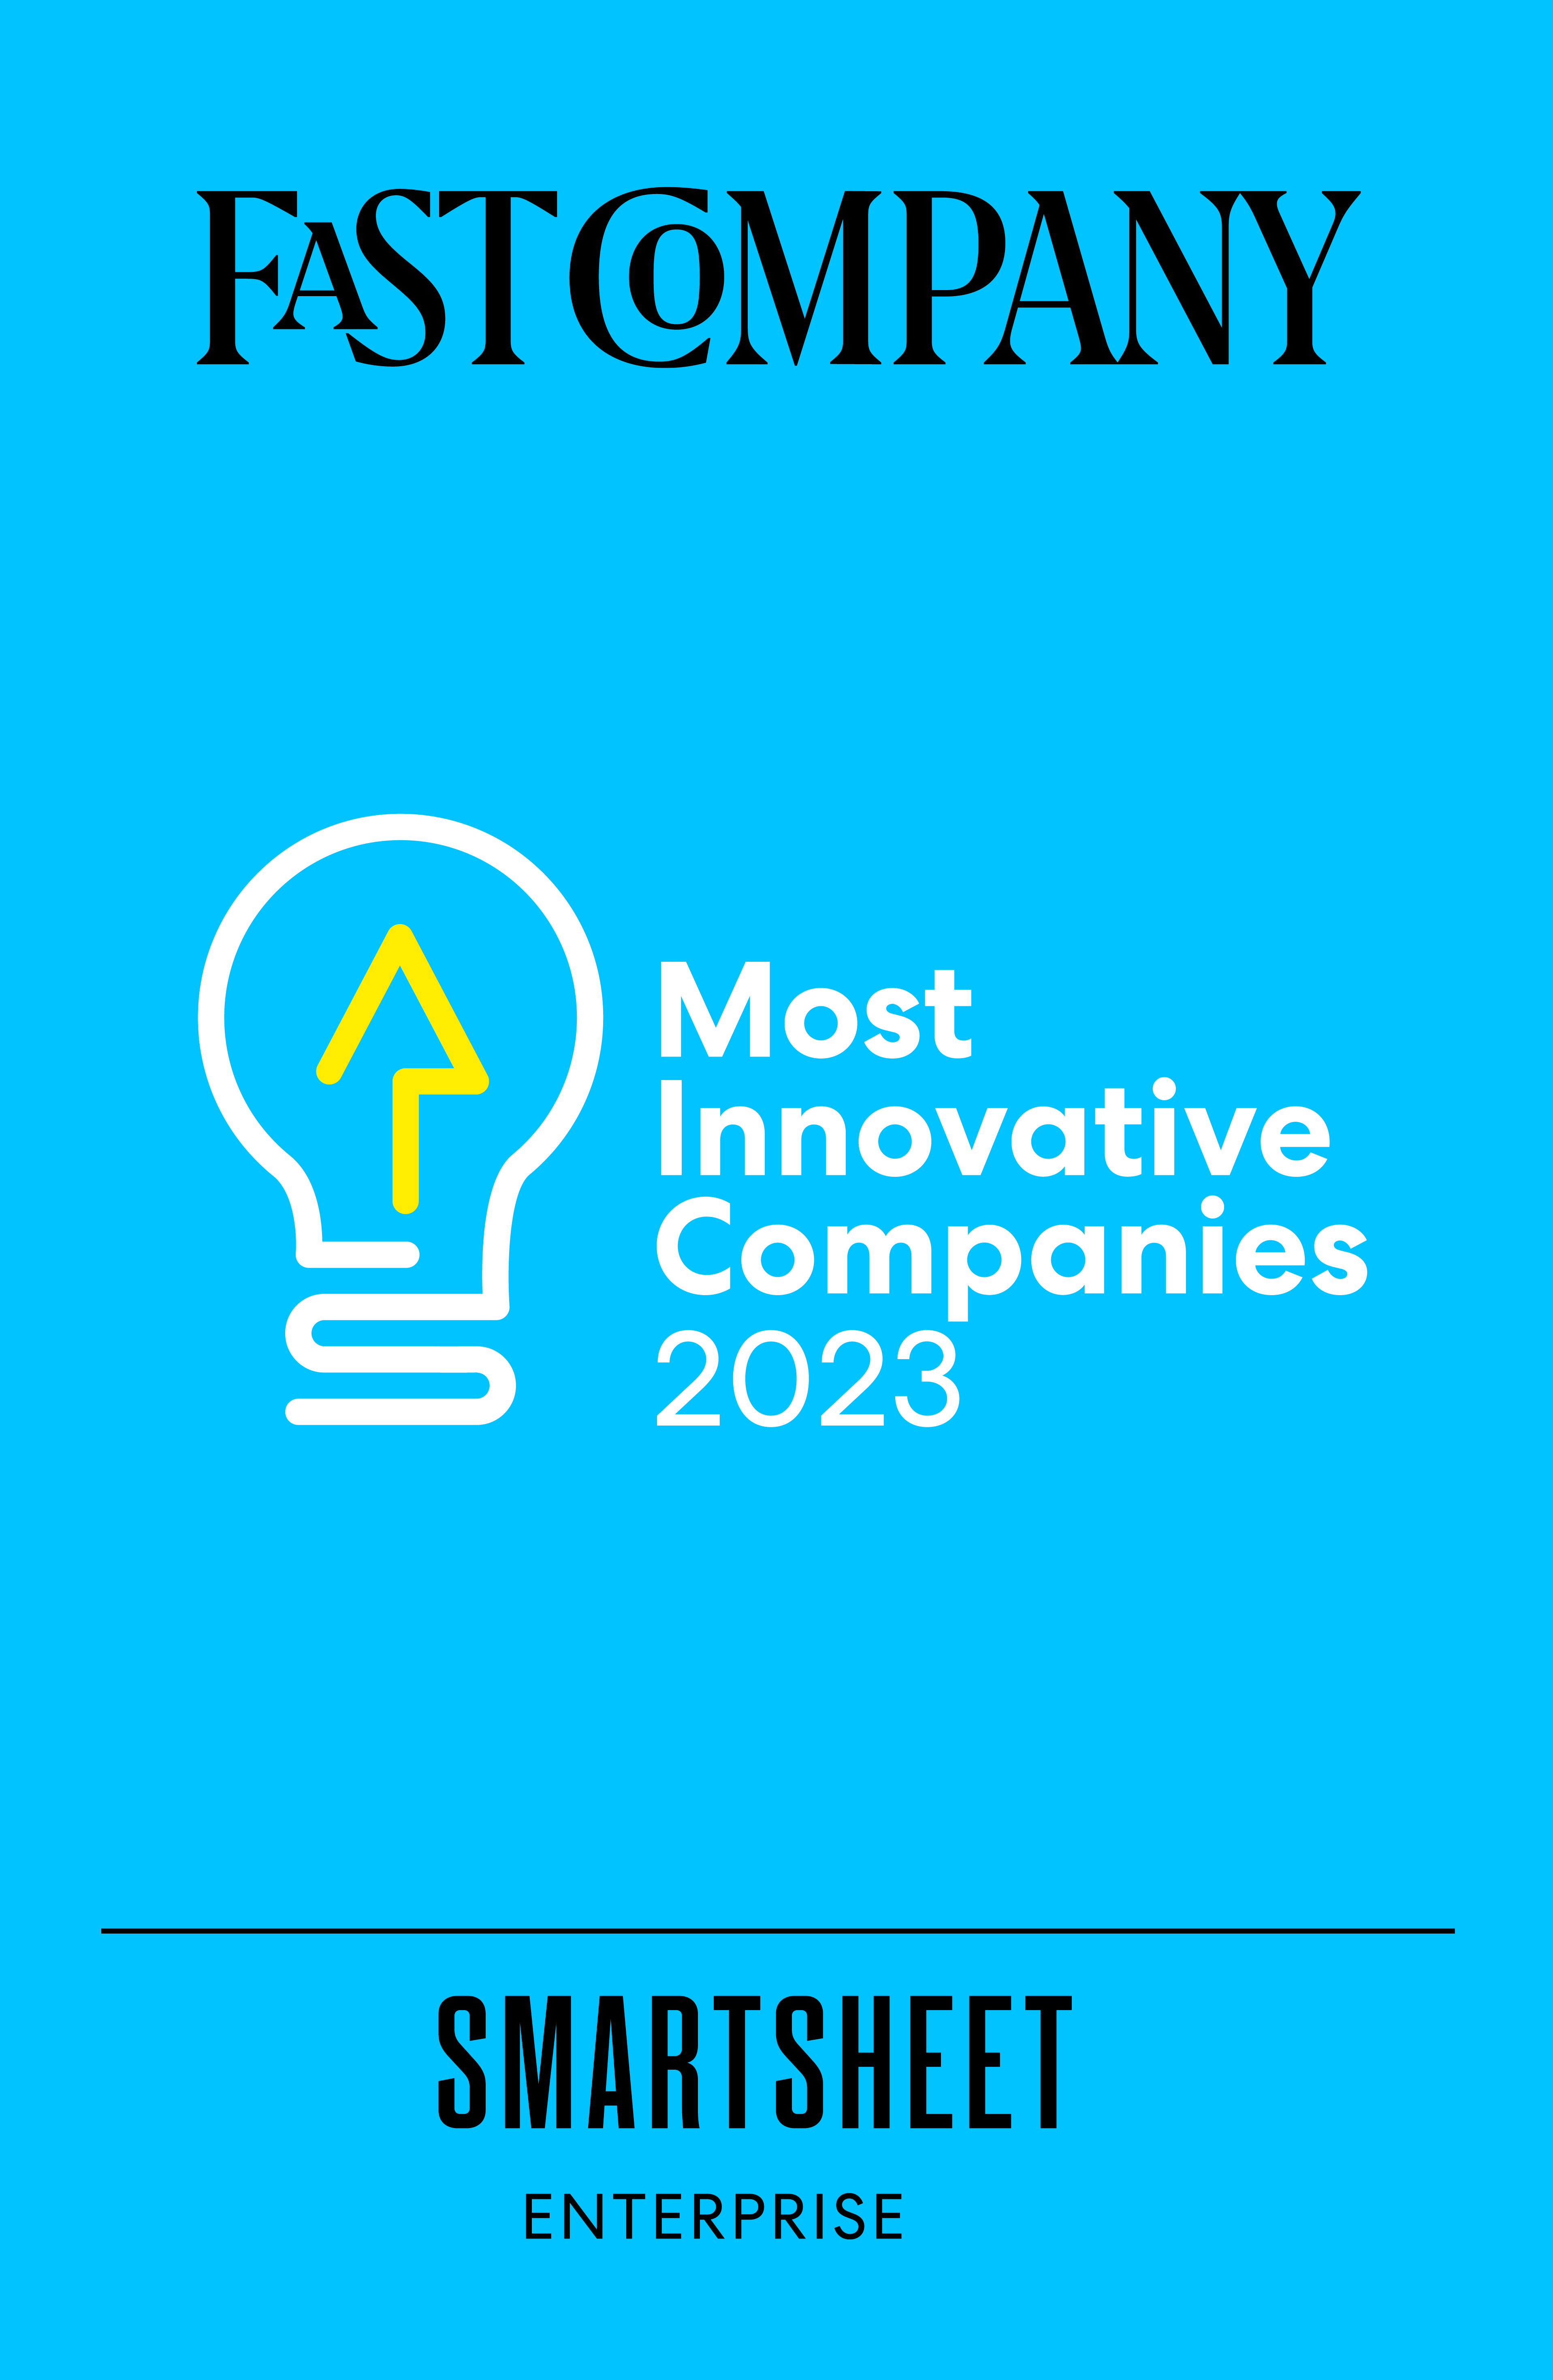 Smartsheet is named as one of Fast Company's 2023 most innovative companies